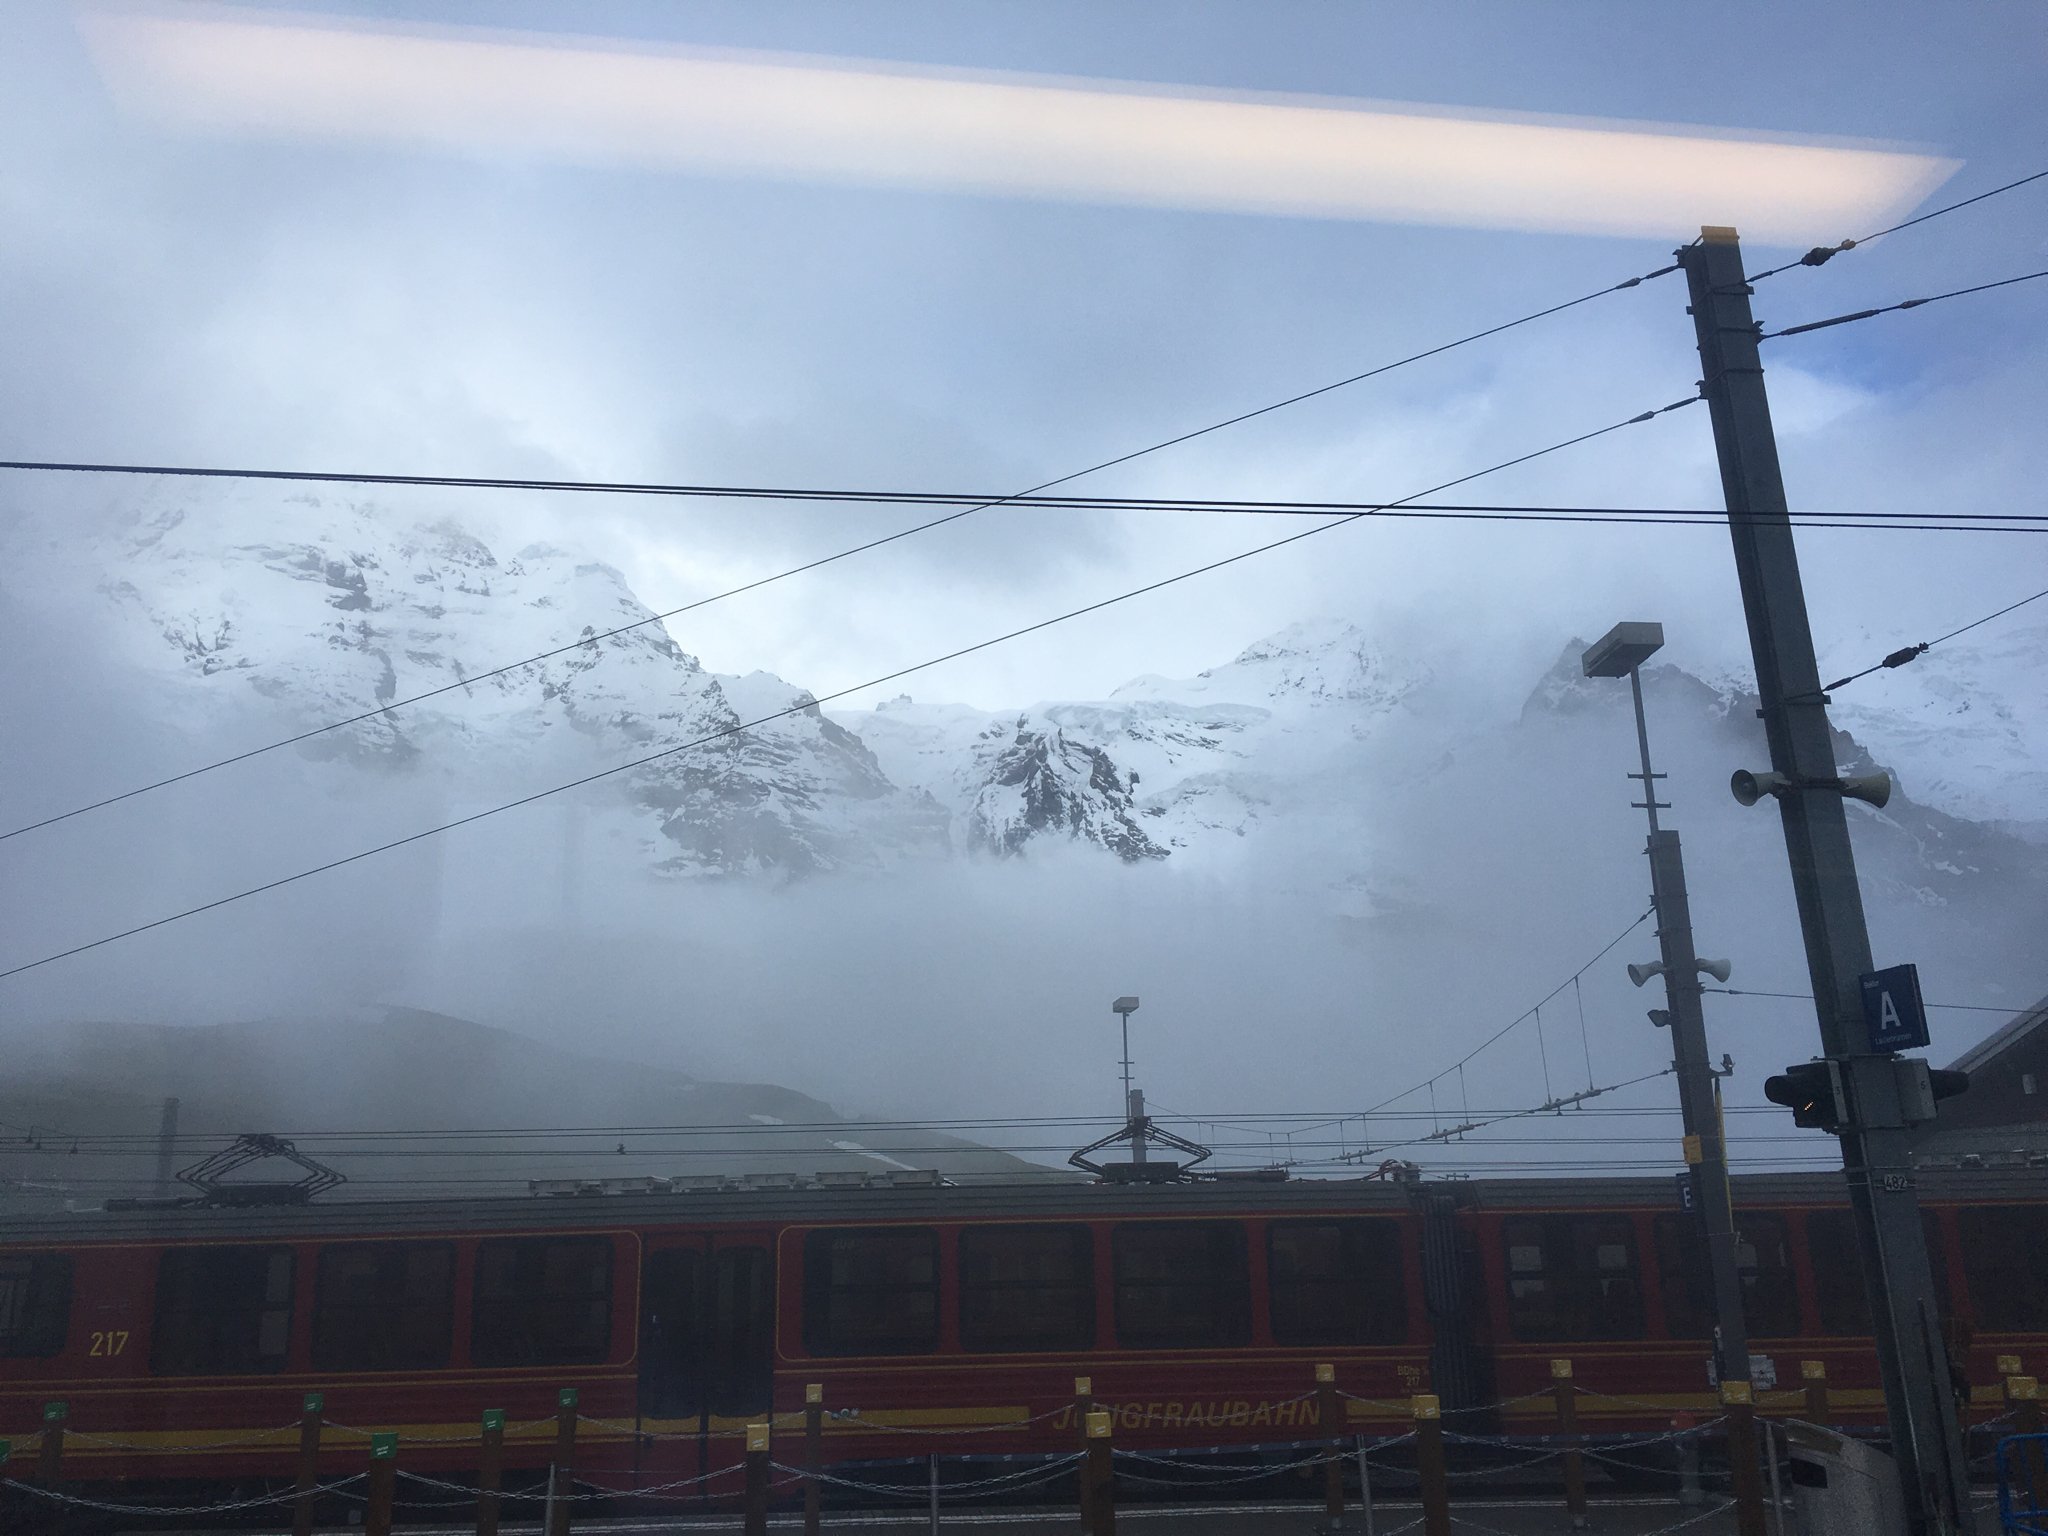 Trains at the base of Jungfrau